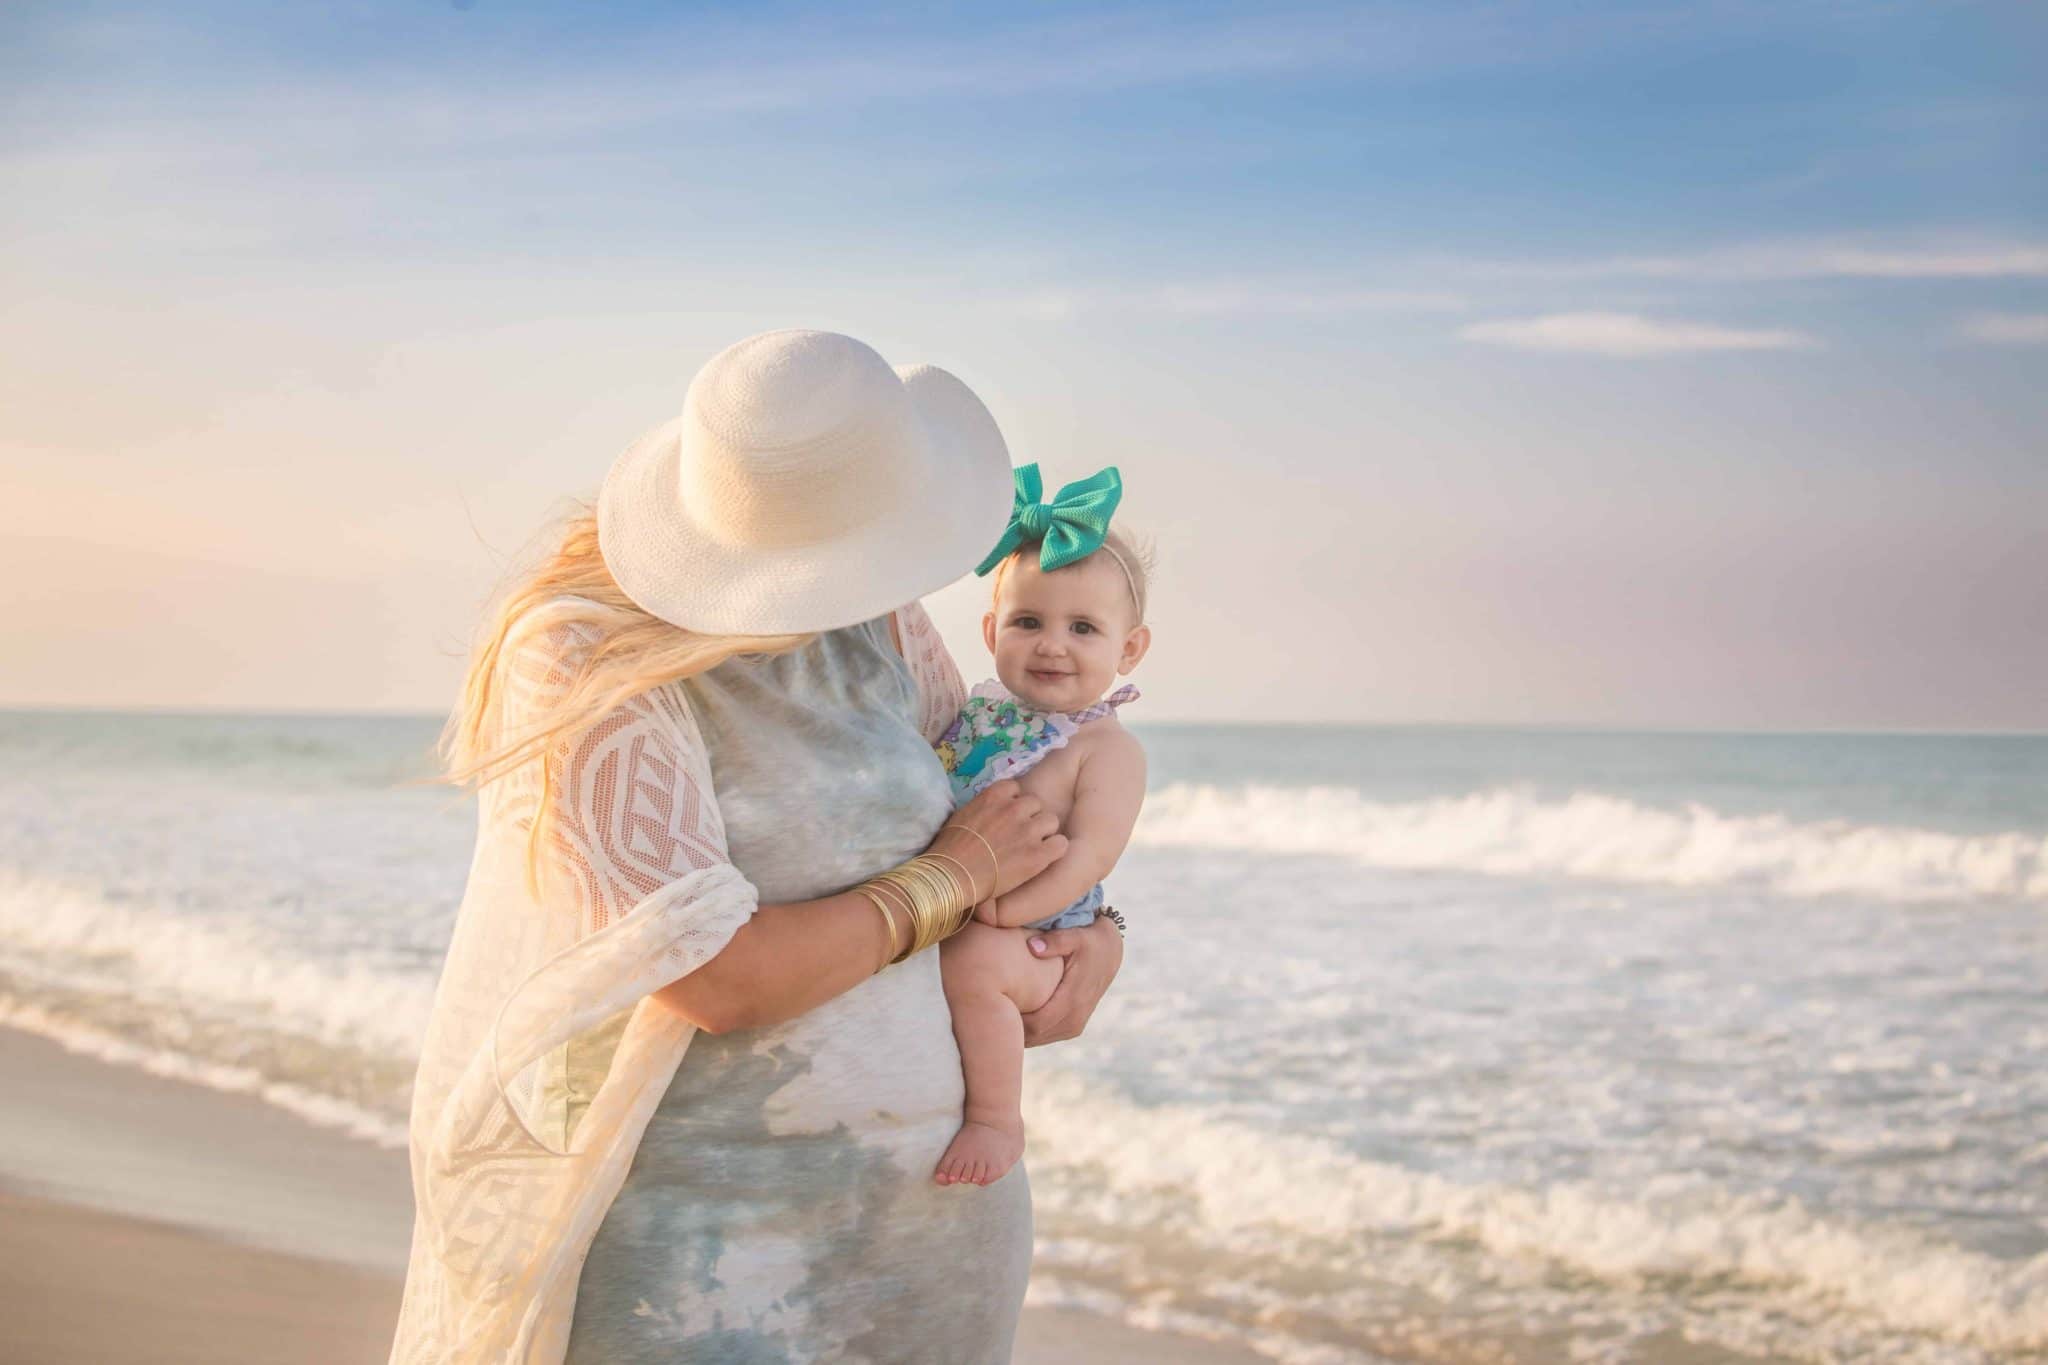 Mommy and baby on Melbourne beach in Florida at sunset with ocean in the background